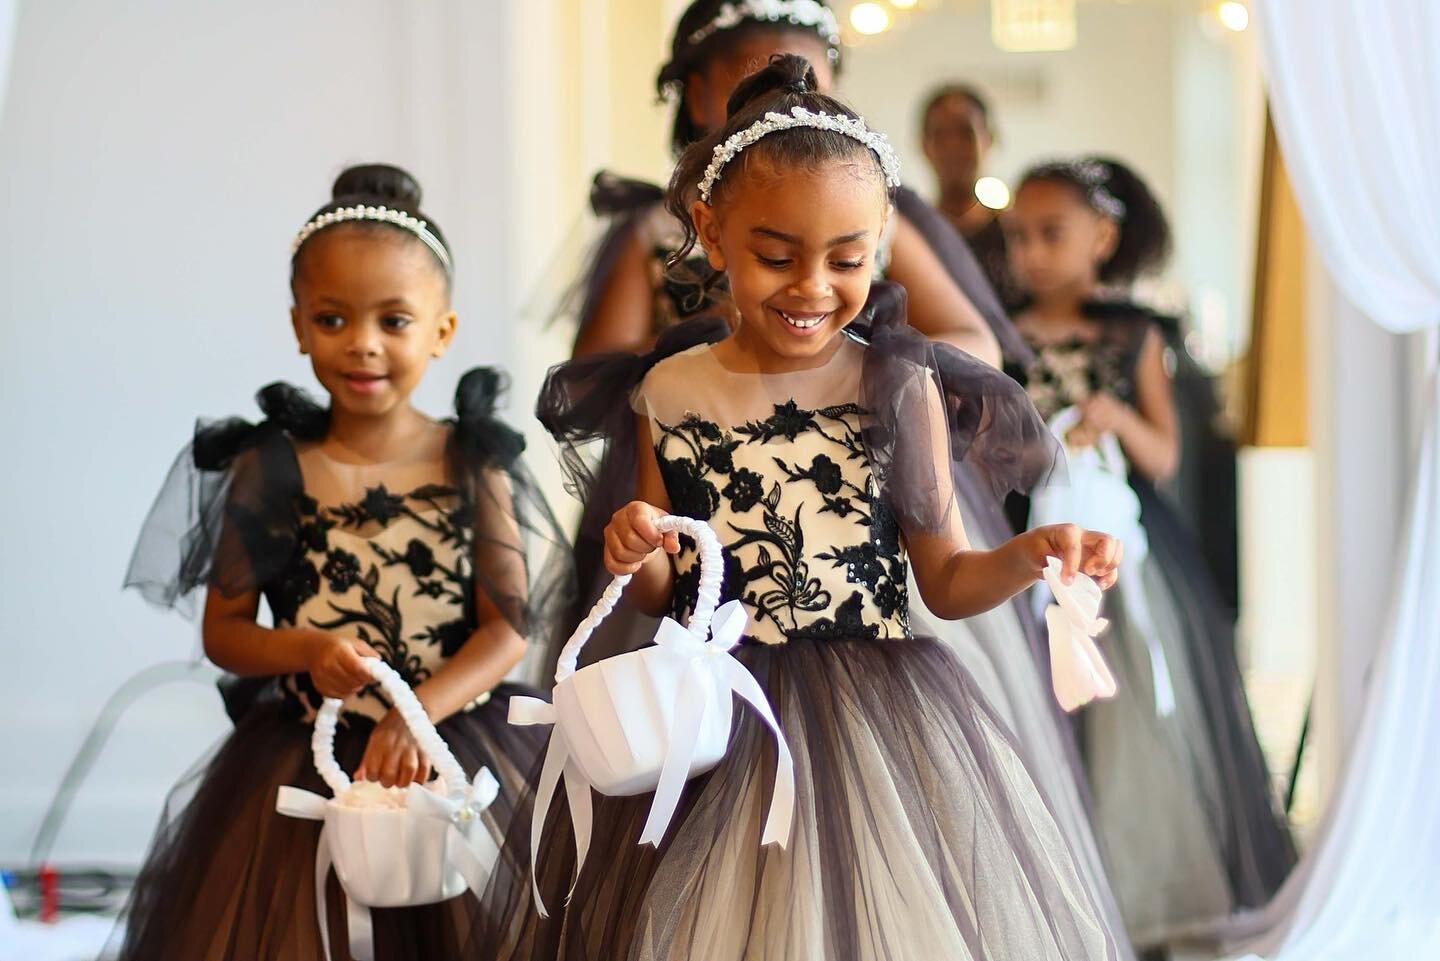 Beautiful little flower girls in beautiful dresses! I love to see how excited they get when it&rsquo;s time for them to throw the rose petals!